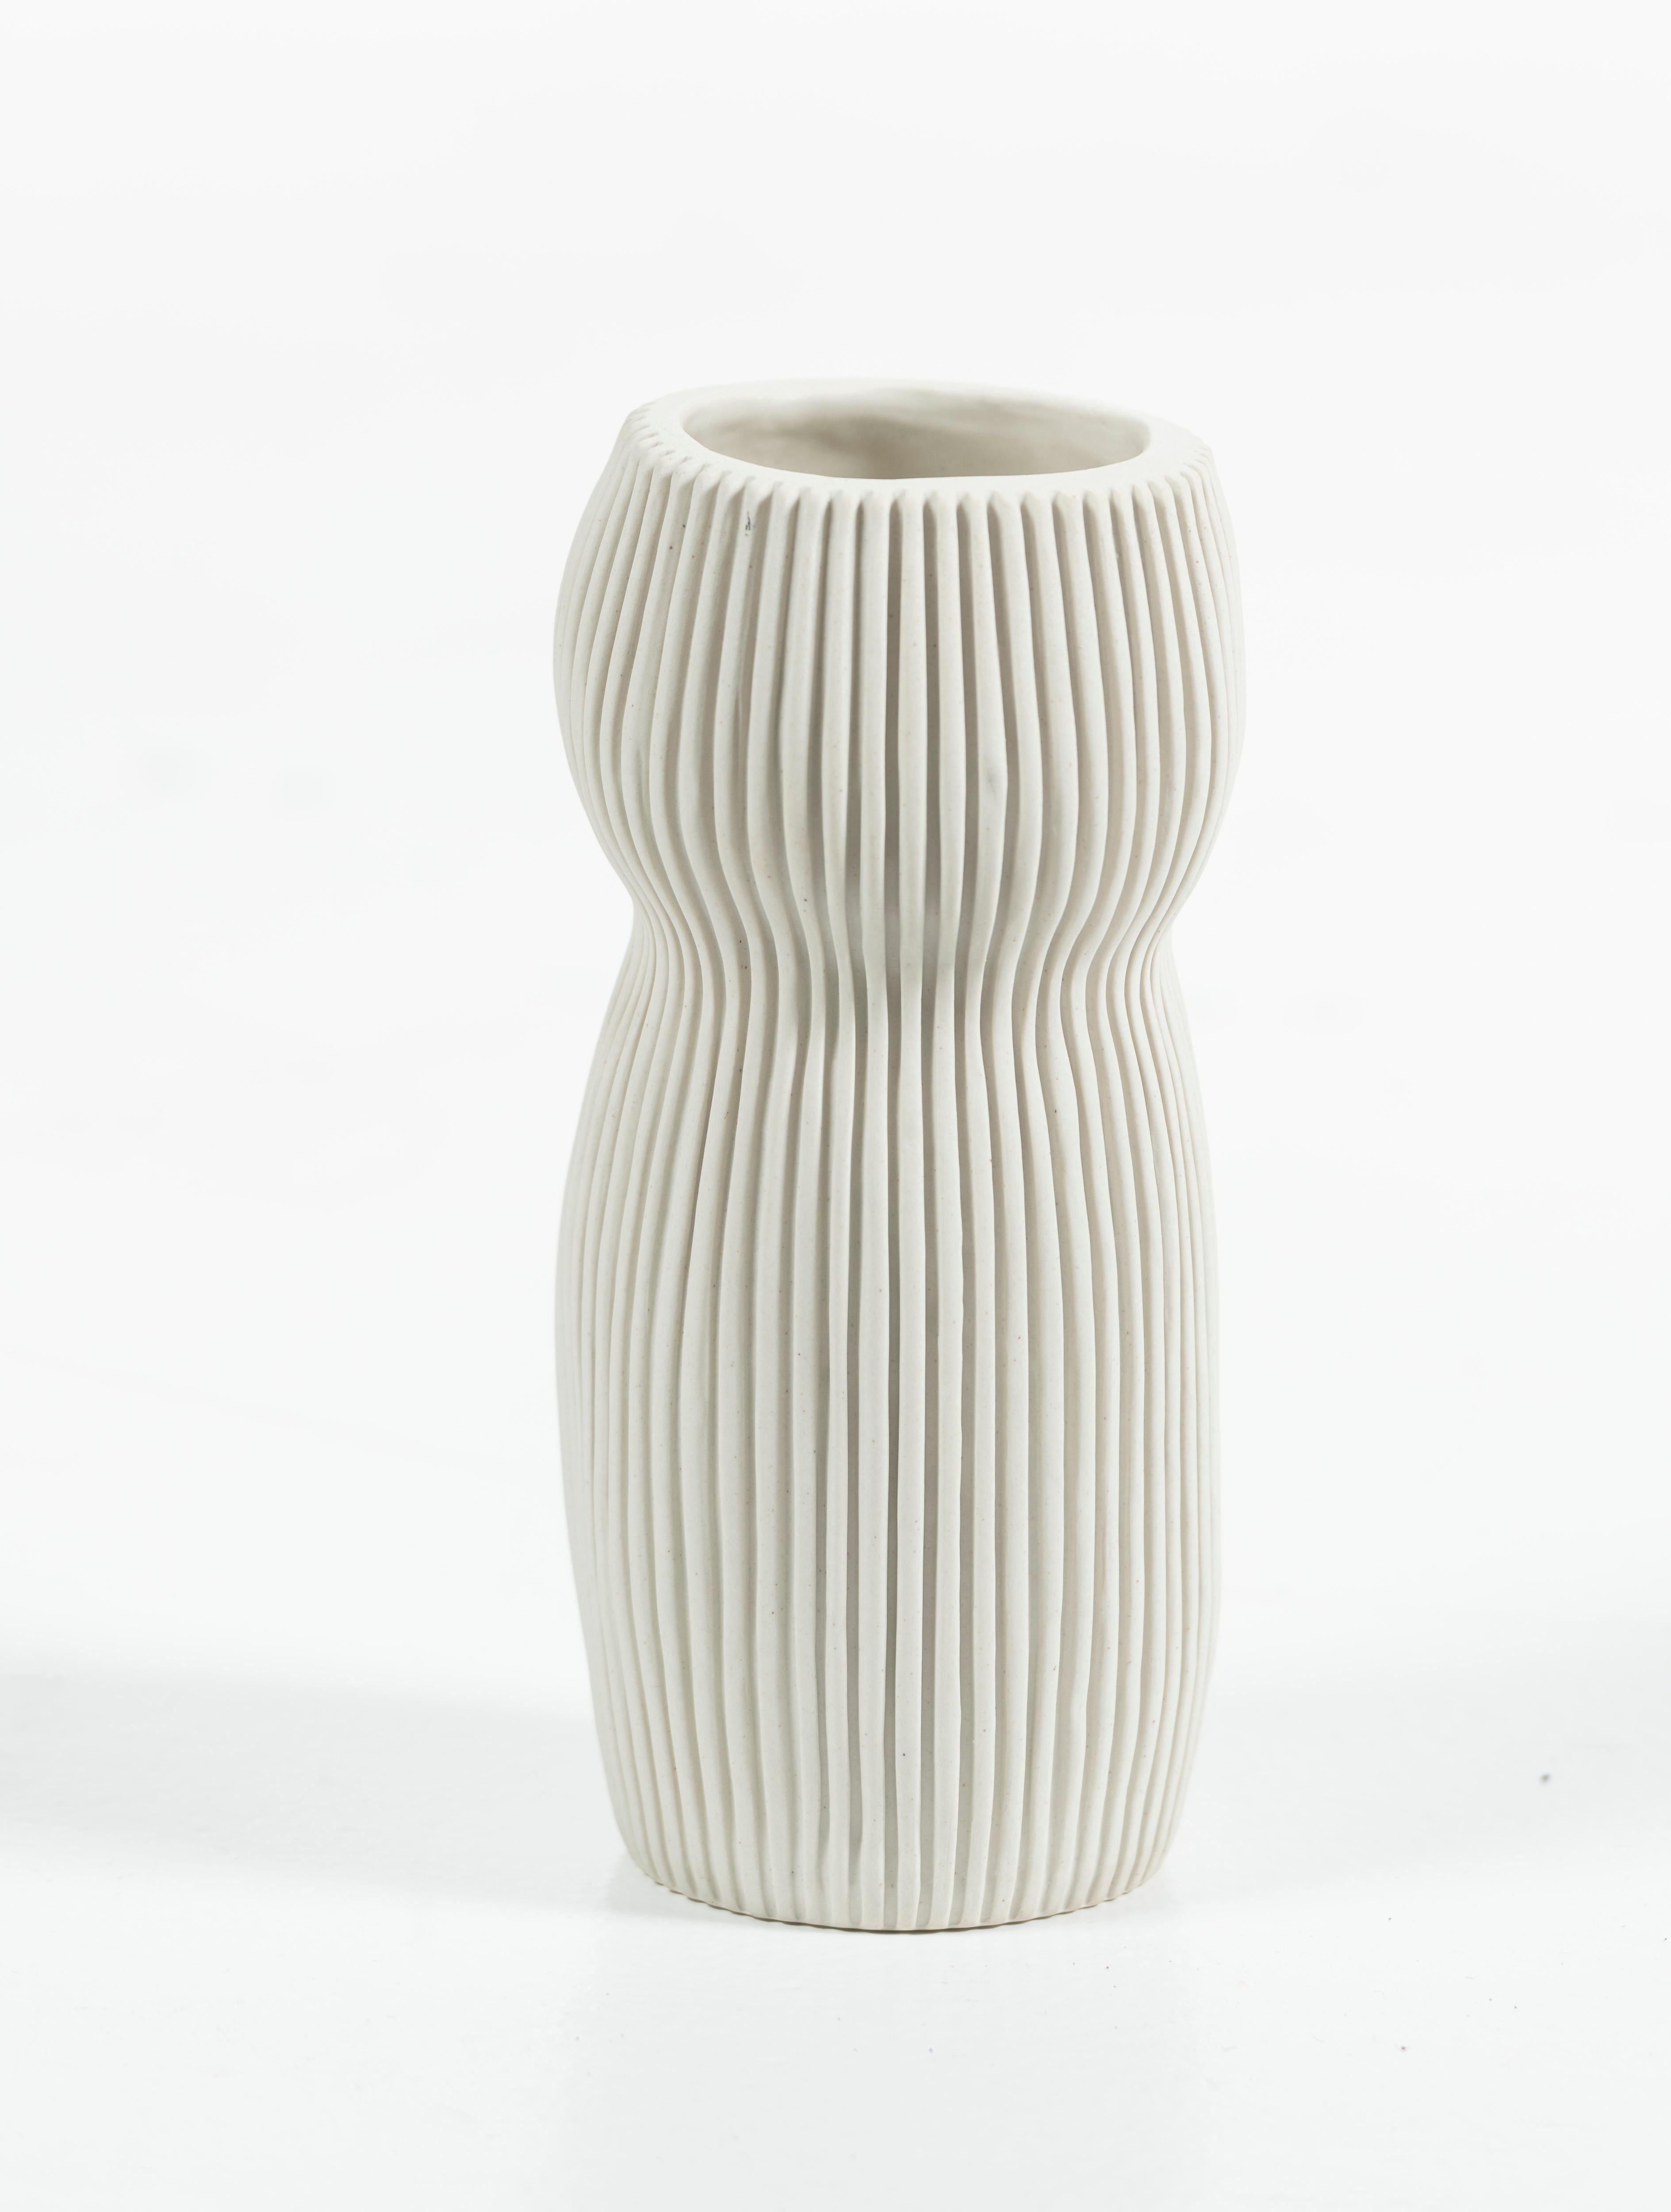 Hand Crafted Contemporary Ceramic Vase in Cream, signed In Good Condition For Sale In San Francisco, CA